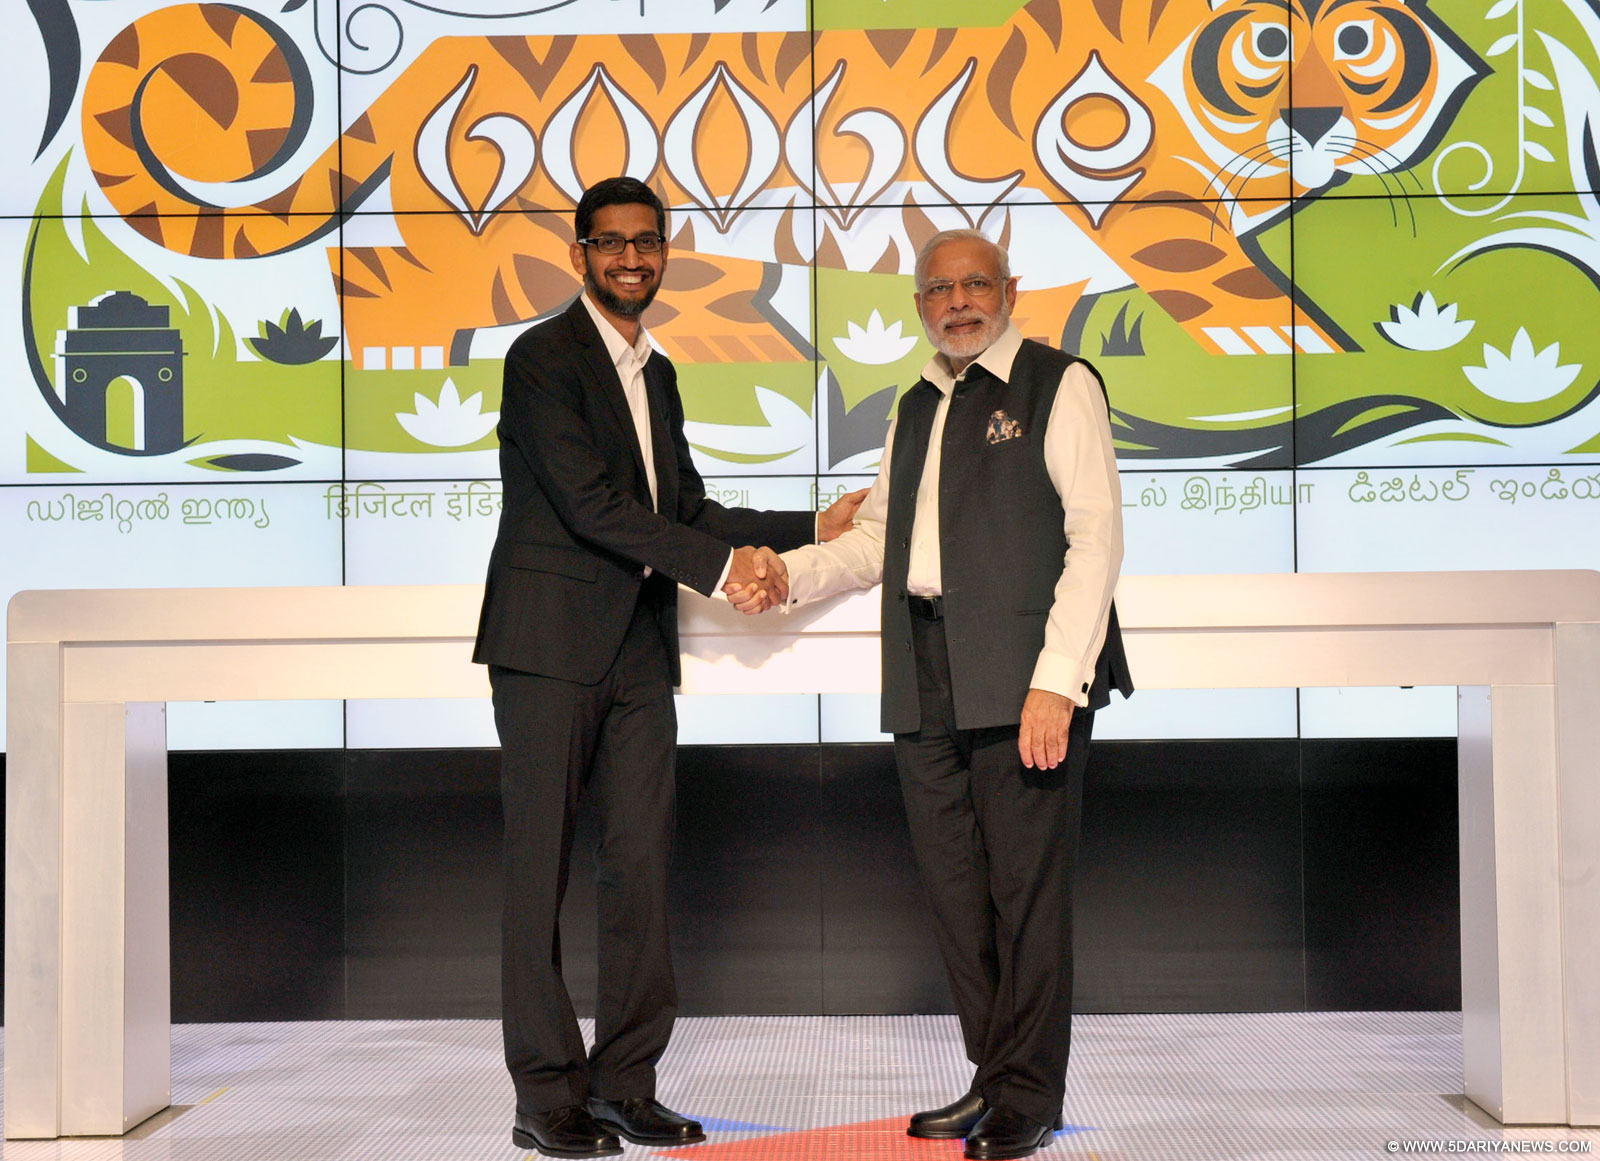 The Prime Minister, Shri Narendra Modi with the CEO, Google, Mr. Sundar Pichai, during his visit to Google (Alphabet) campus, in Silicon Valley, California on September 27, 2015.